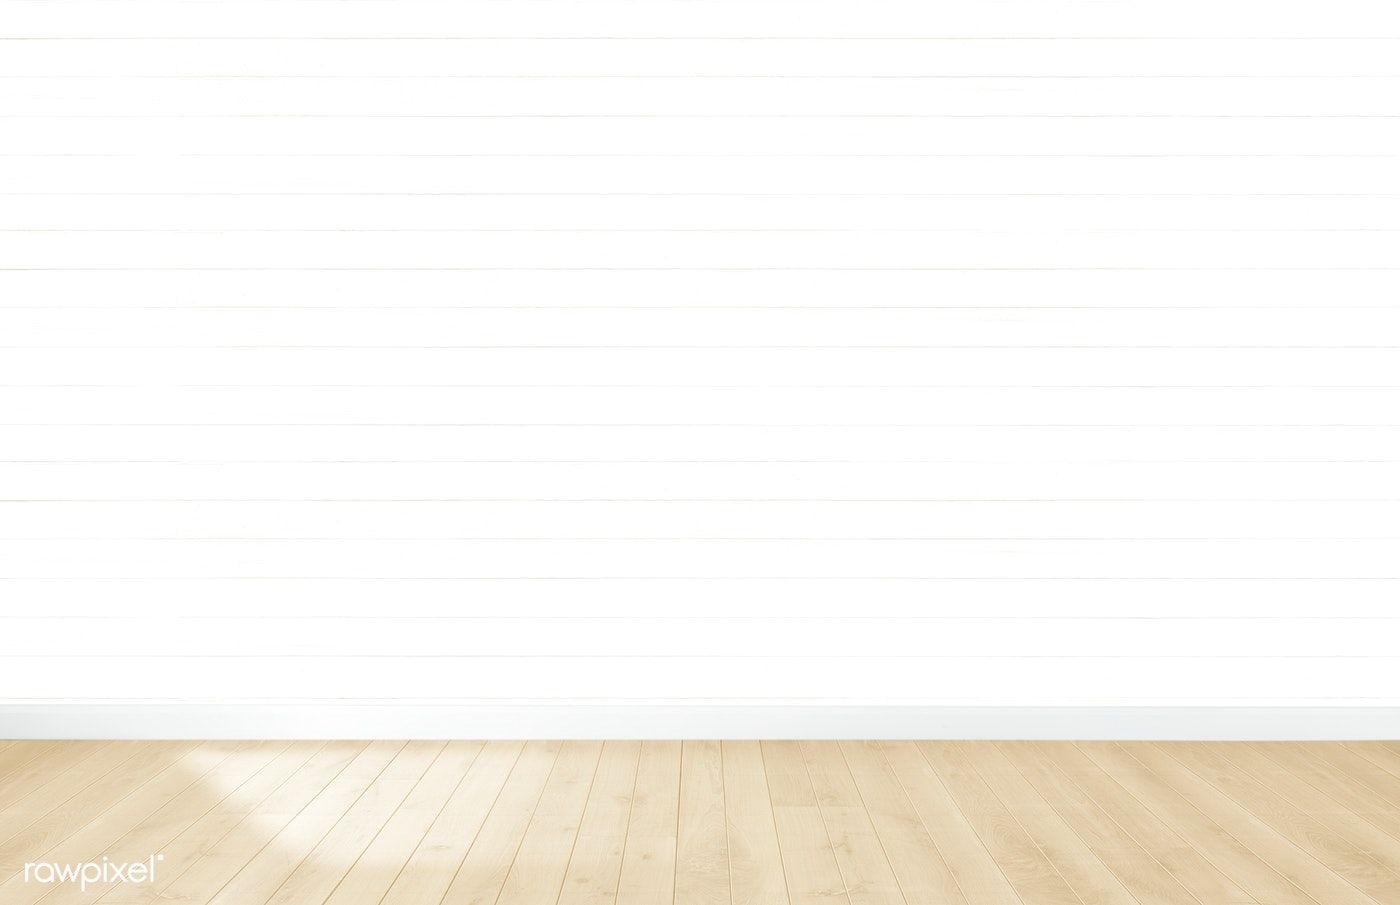 Download premium photo of White wallpaper in an empty room with wooden